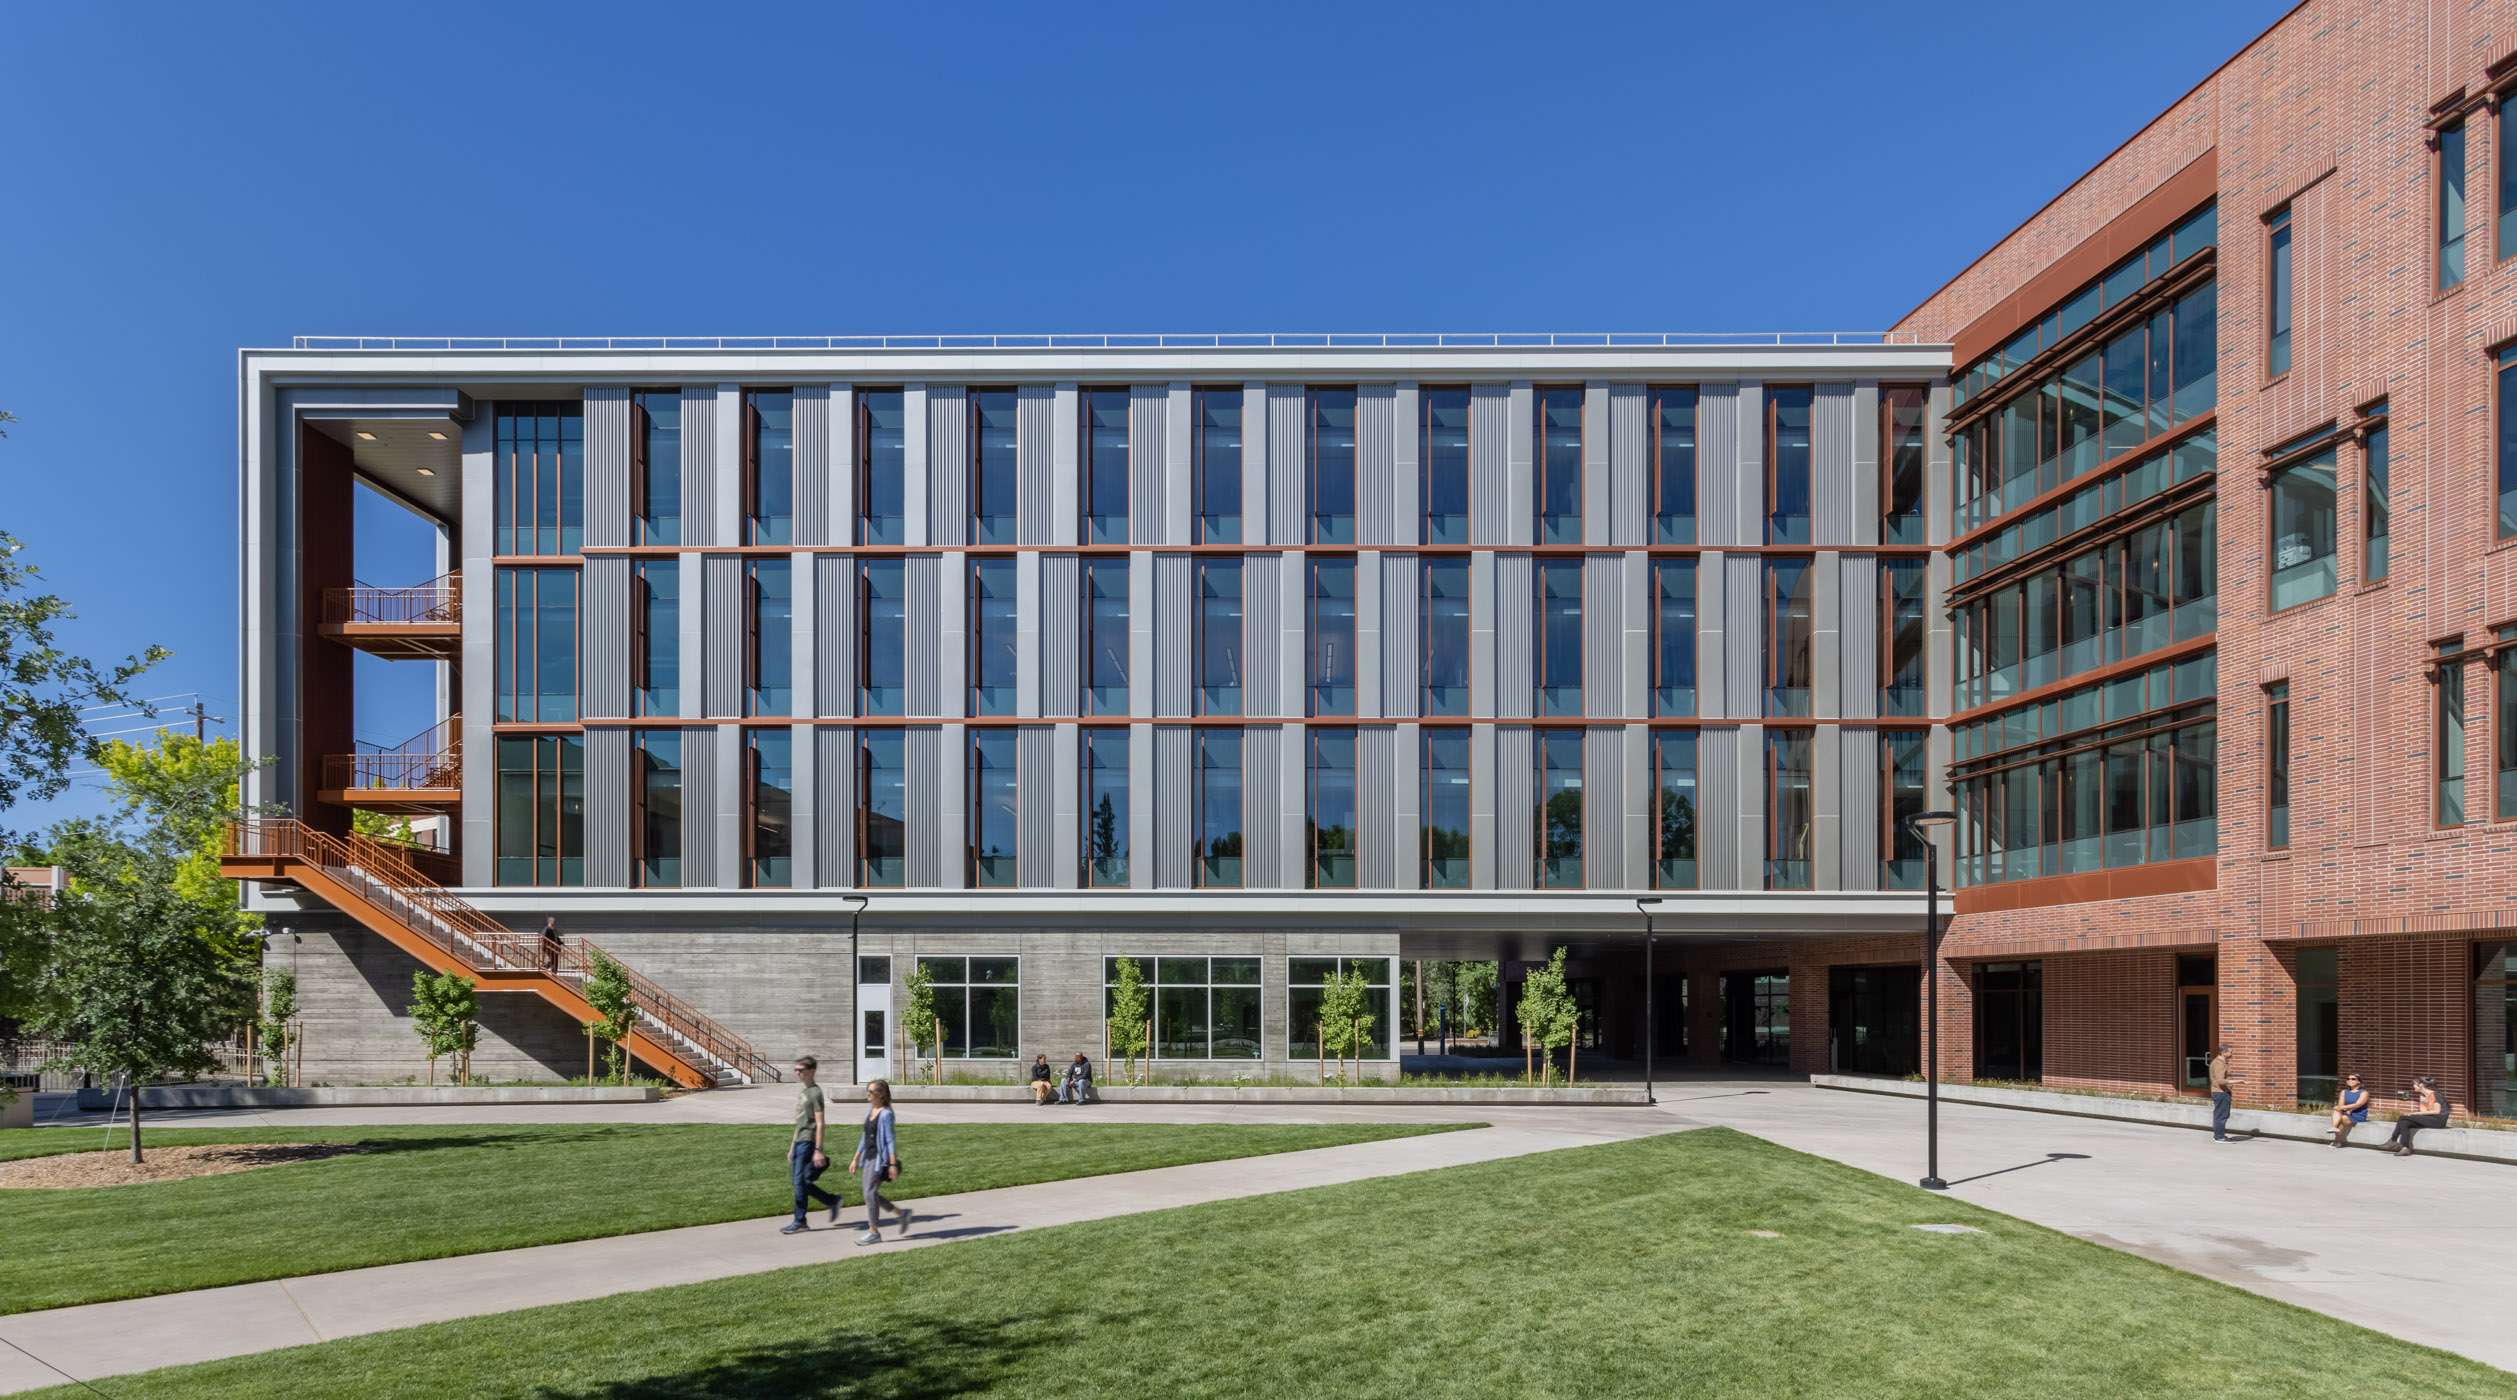 4-21_Smithgroup_ChicoState-4496-Edit_InstitutionsGallery